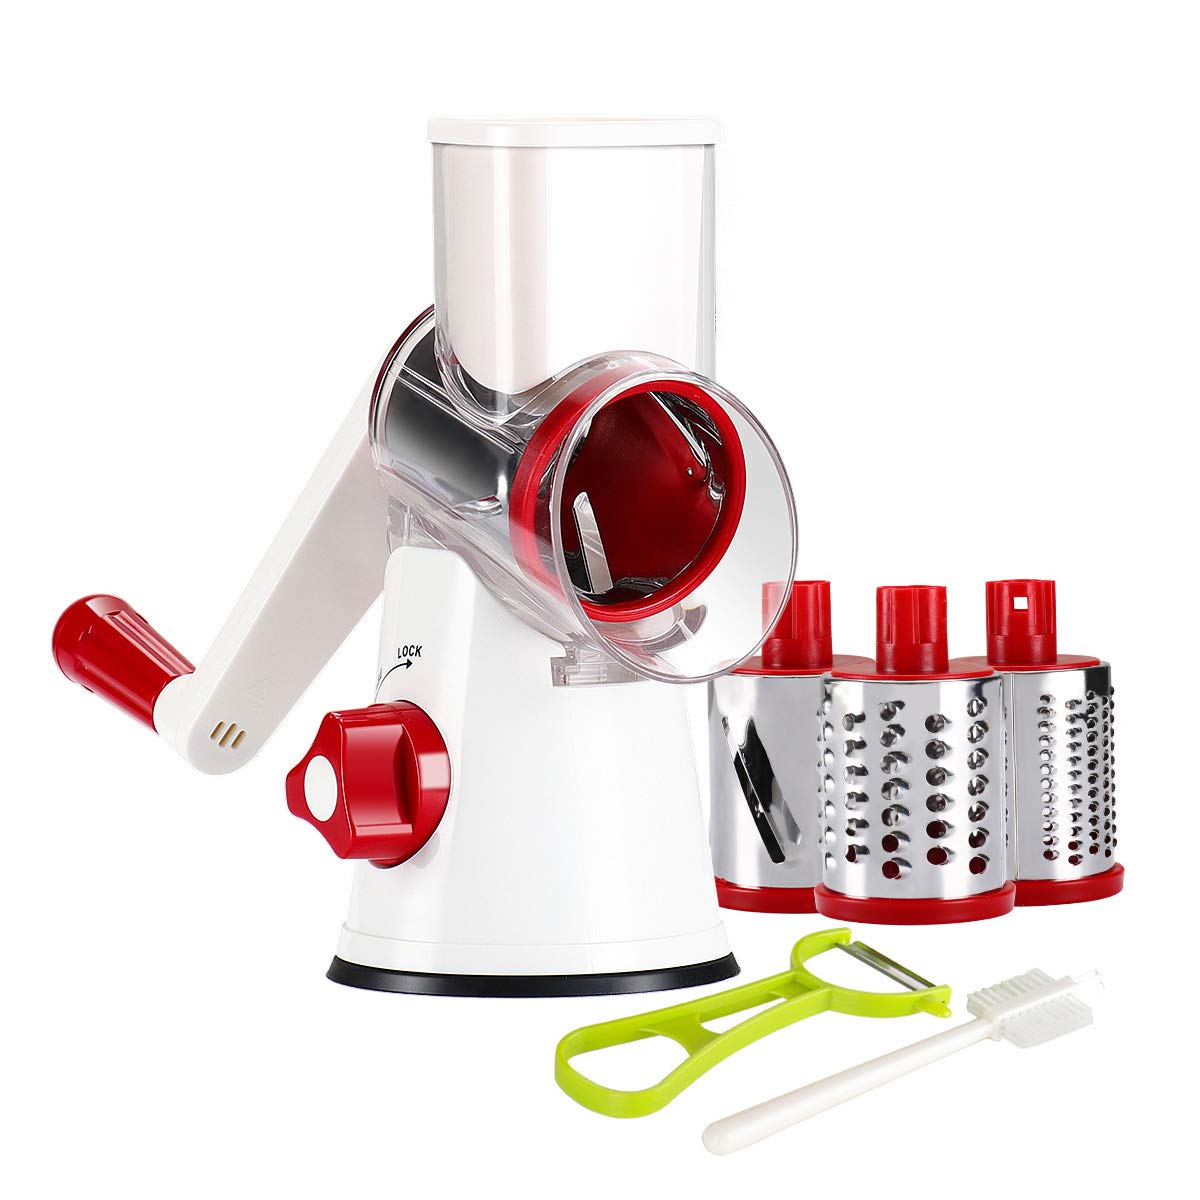 Manual 3-in-1 Rotary Food Processor, Manual Cheese Drum Grater, Hand-Powered Meat Grinder Slicer, Easy to Clean Oriental Kitchen Appliance with 3 Drum